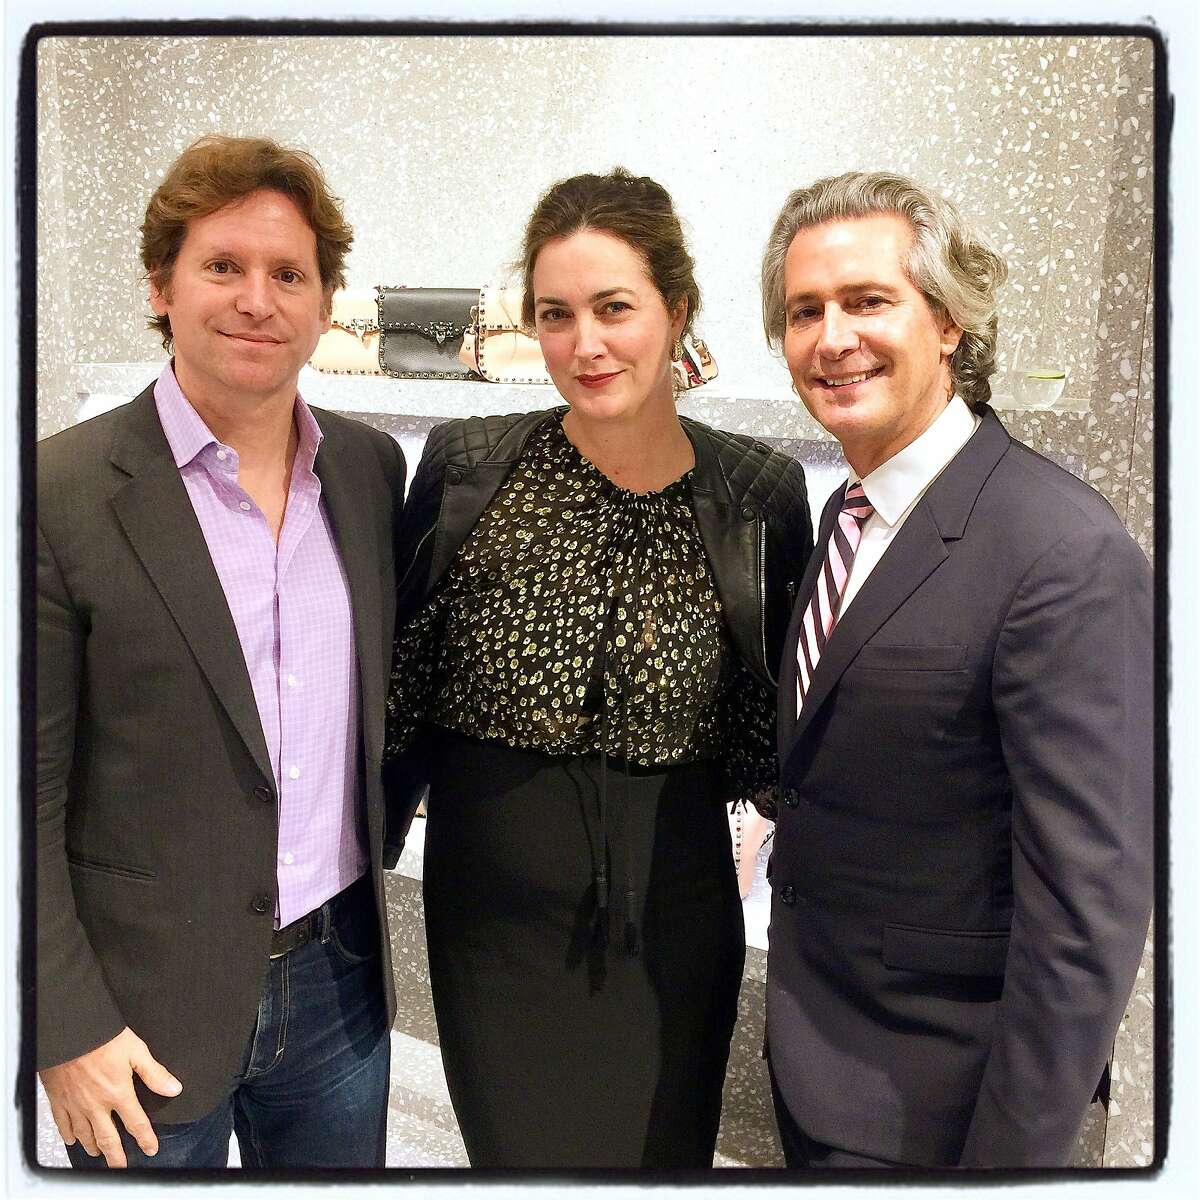 Trevor and Alexis Traina (left) with Valentino global ambassador Carlos Souza at the boutique for Fulk's book signing. Oct 2016.